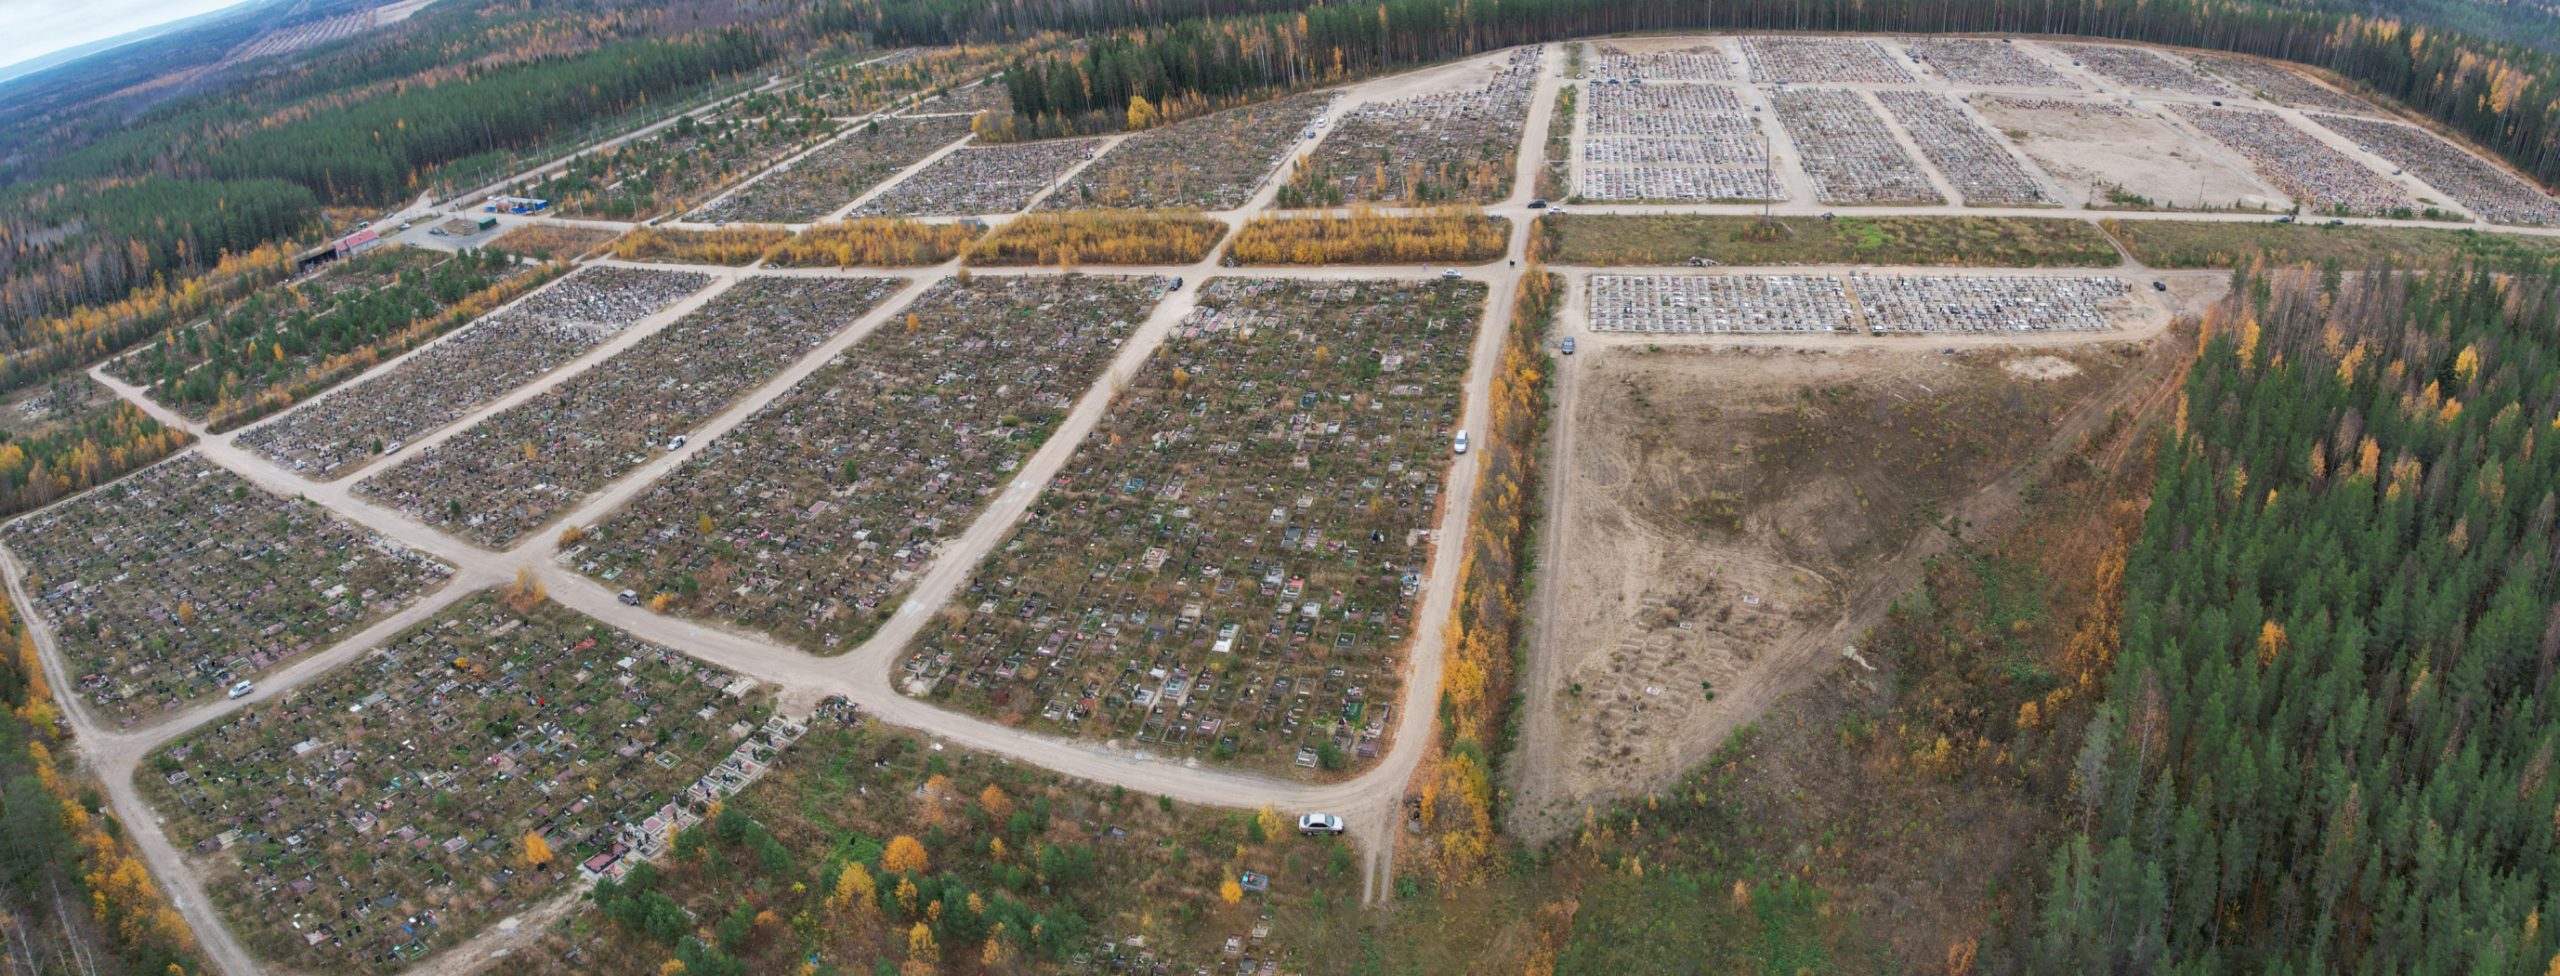 bird's eye view of the cemetary in Petrozavodsk